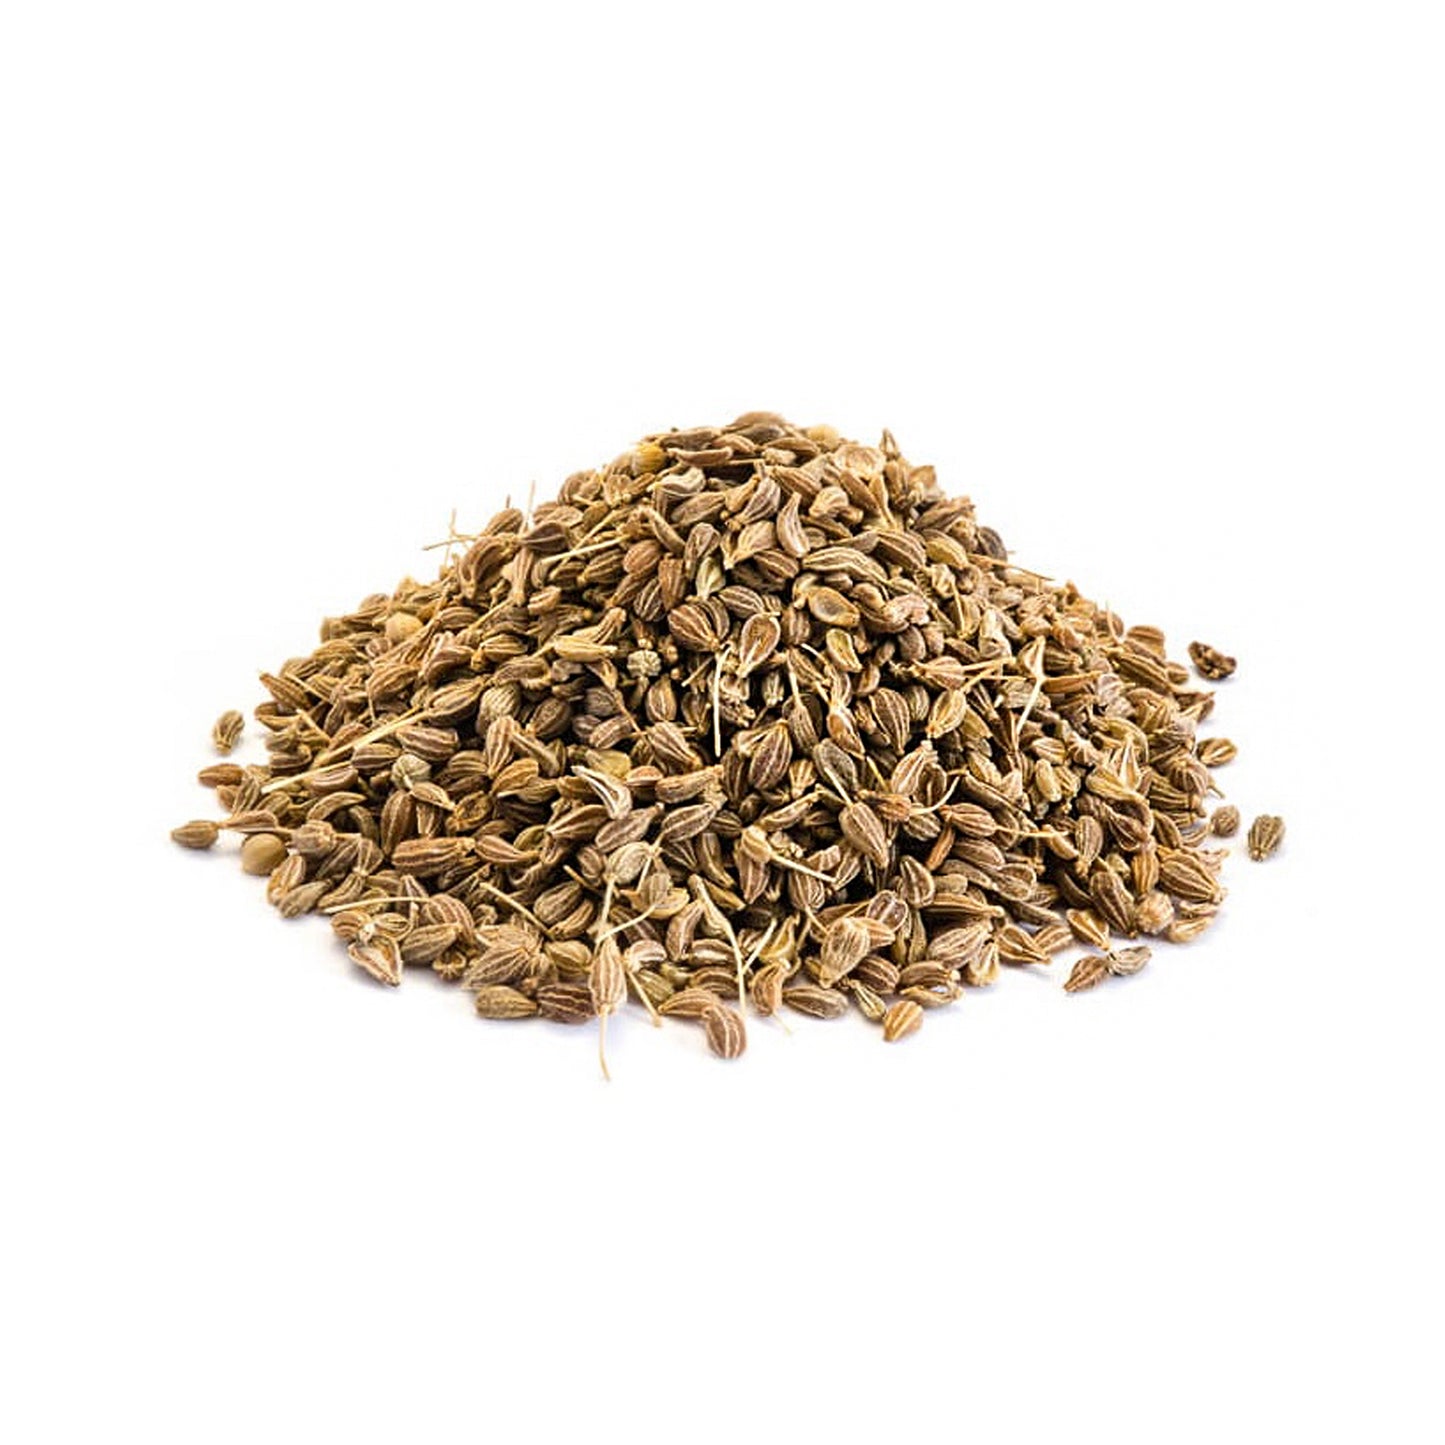 Discover the aromatic delight of our Organic Whole Aniseed. These flavorful and fragrant seeds, weighing 0.19 lb, are perfect for enhancing your culinary creations. Shop now and enjoy the authentic taste and natural goodness of organic aniseed.